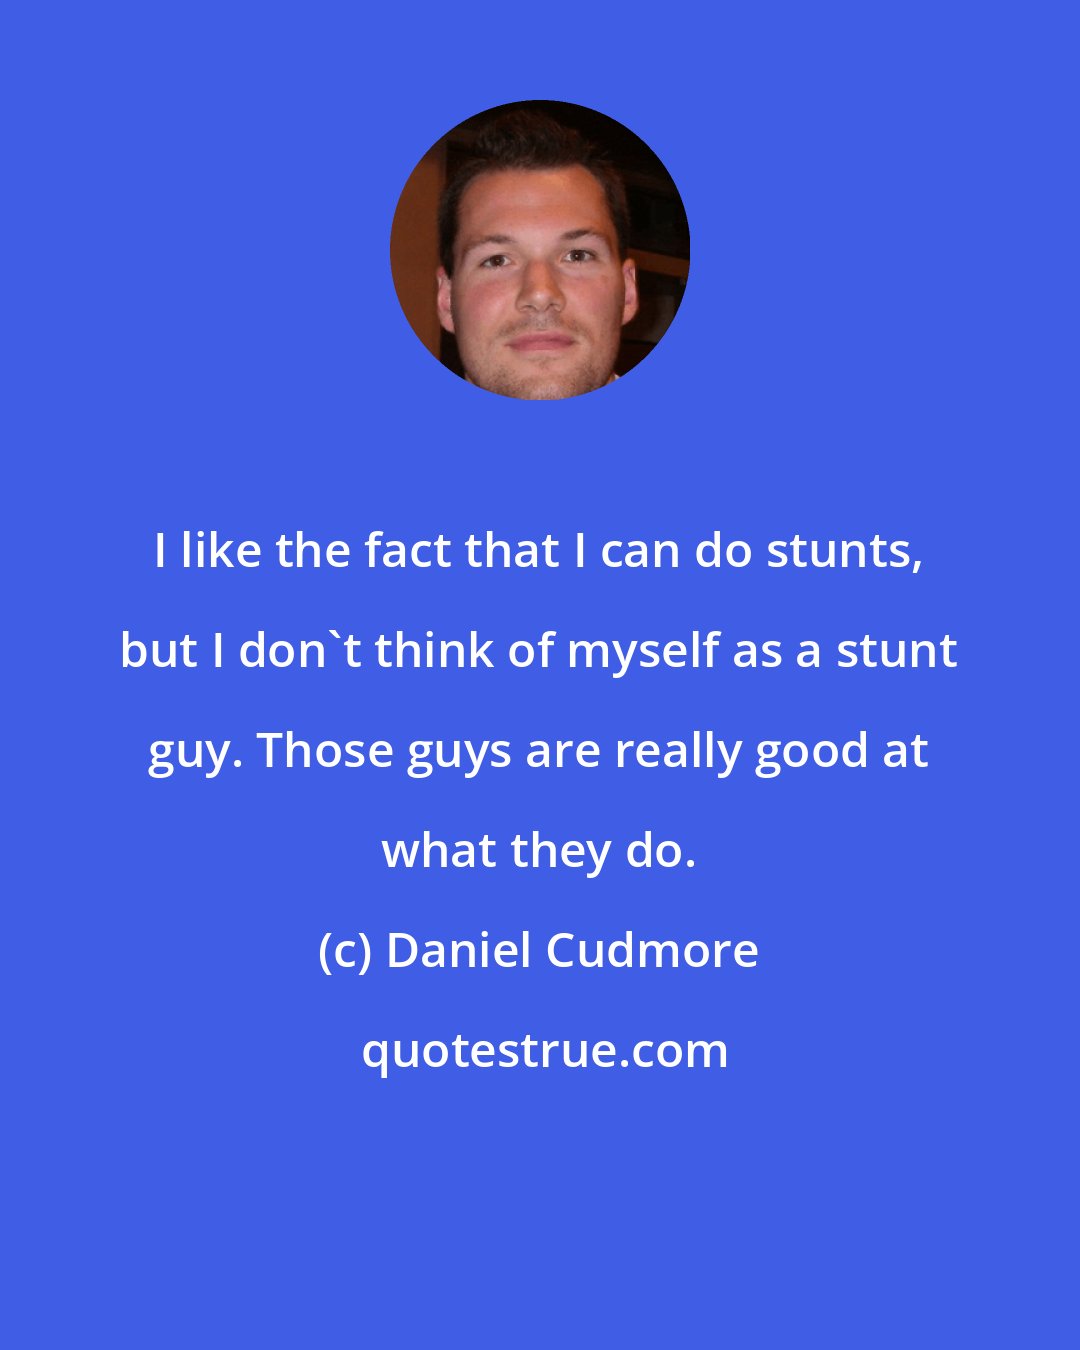 Daniel Cudmore: I like the fact that I can do stunts, but I don't think of myself as a stunt guy. Those guys are really good at what they do.